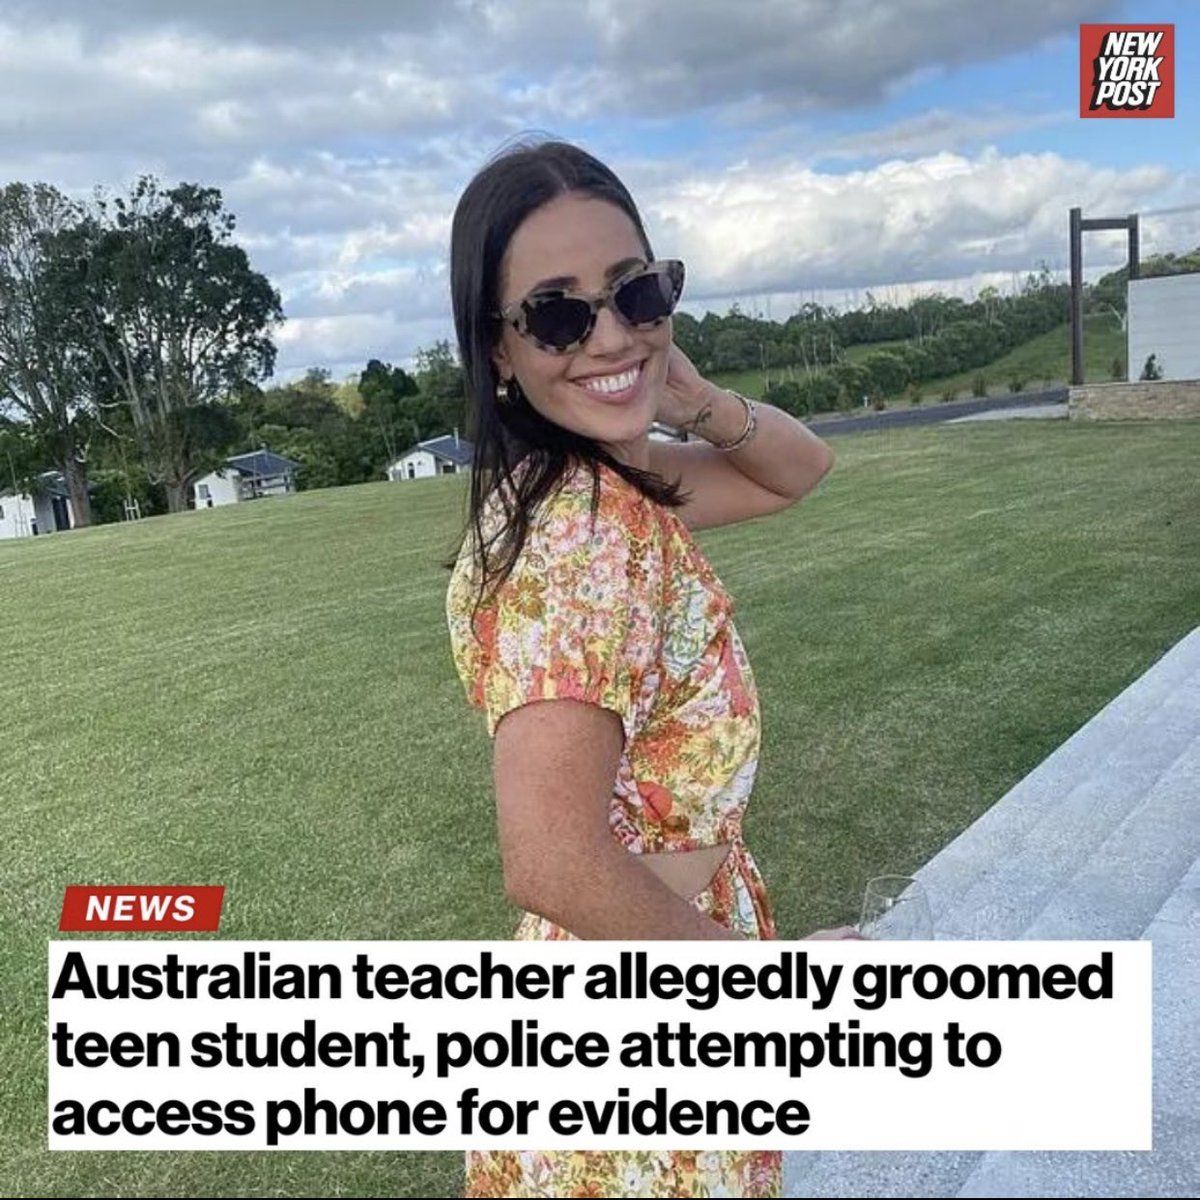 Chelsea Jane Edwards, 28, a teacher at Indooroopilly State High School in Brisbane, Australia was charged in March with two counts of grooming and one count of indecent treatment of a child under 16. ⬇️
#GroomerCult #GroomingReport